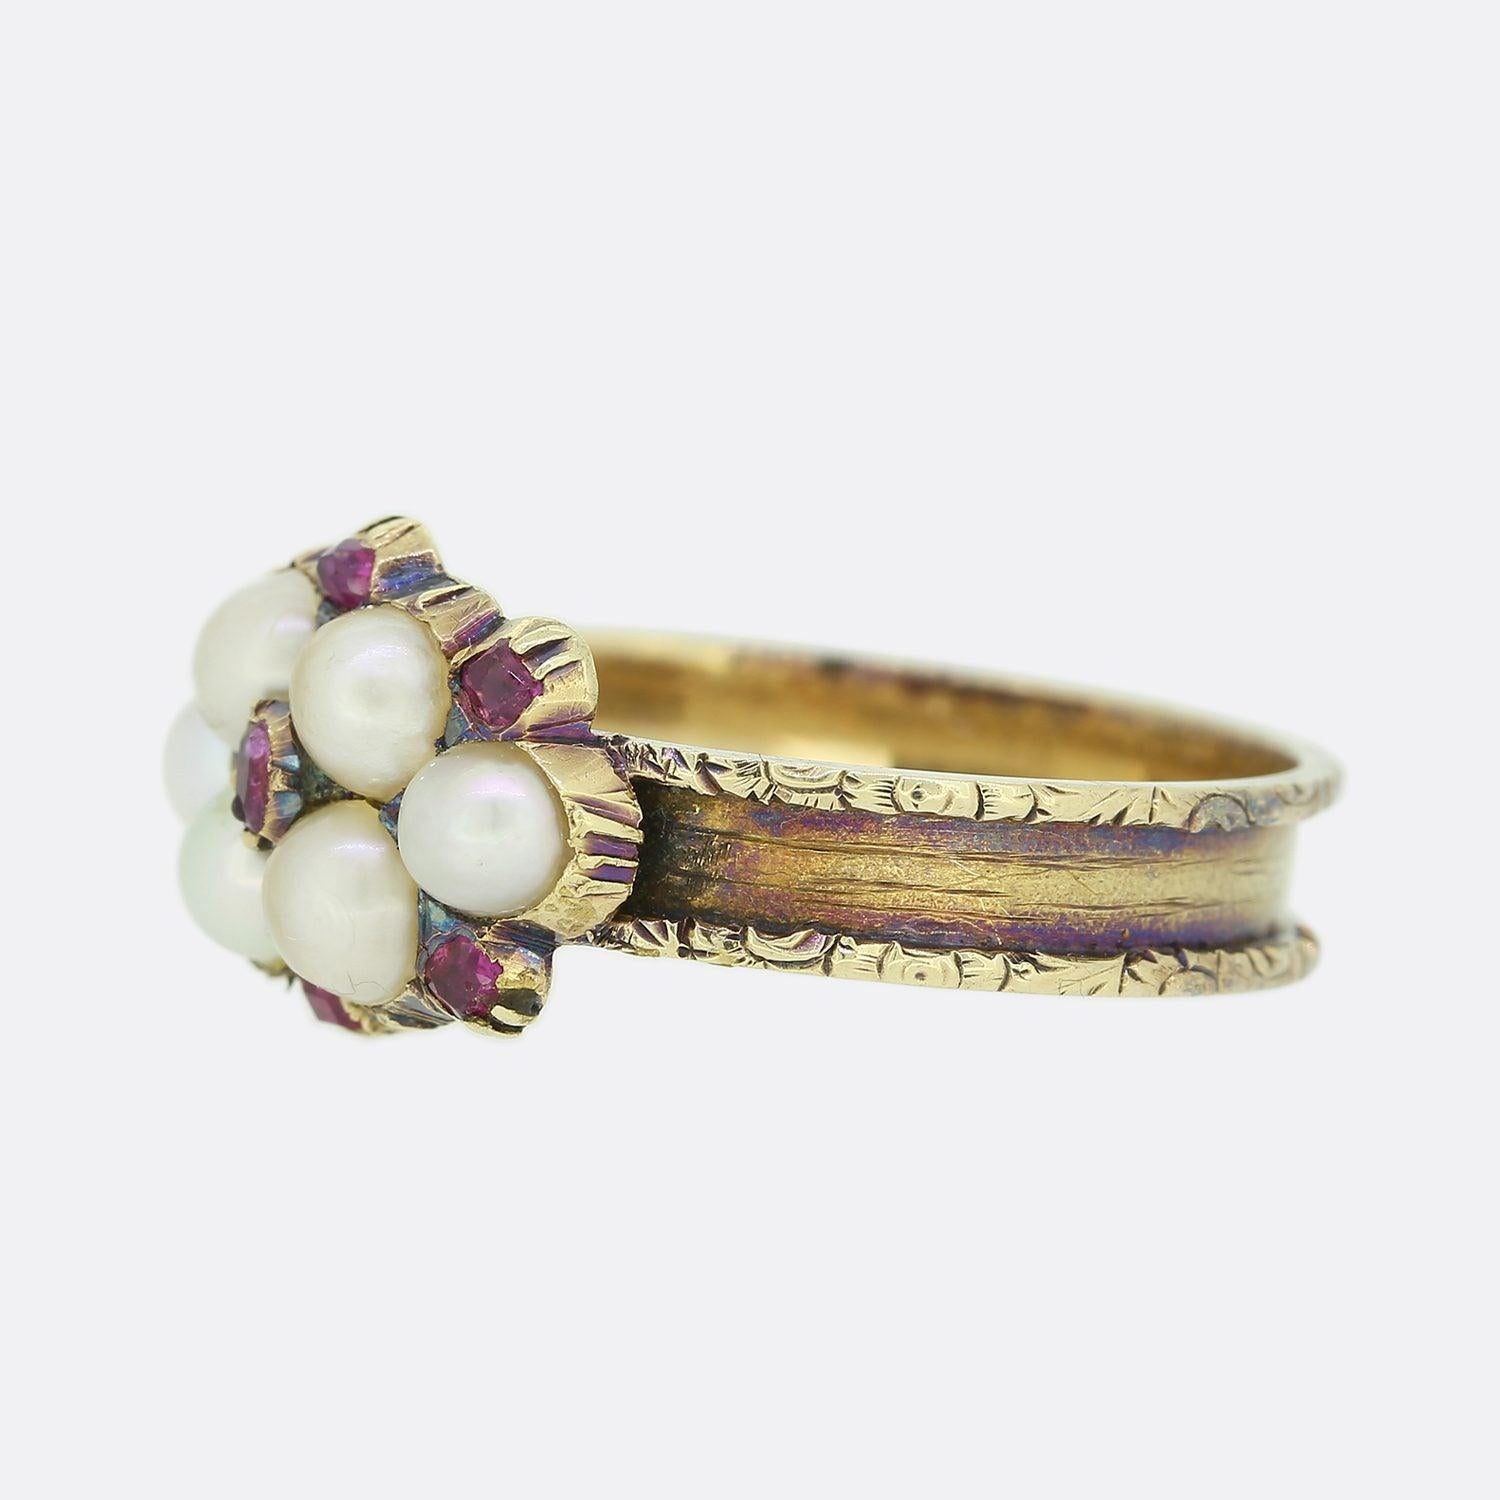 This is a beautiful Georgian 15ct gold pearl and ruby cluster ring. The central ruby is surrounded by four large natural half pearls which themselves are flanked by an additional single half pearl on either side. These focal stones are encompassed